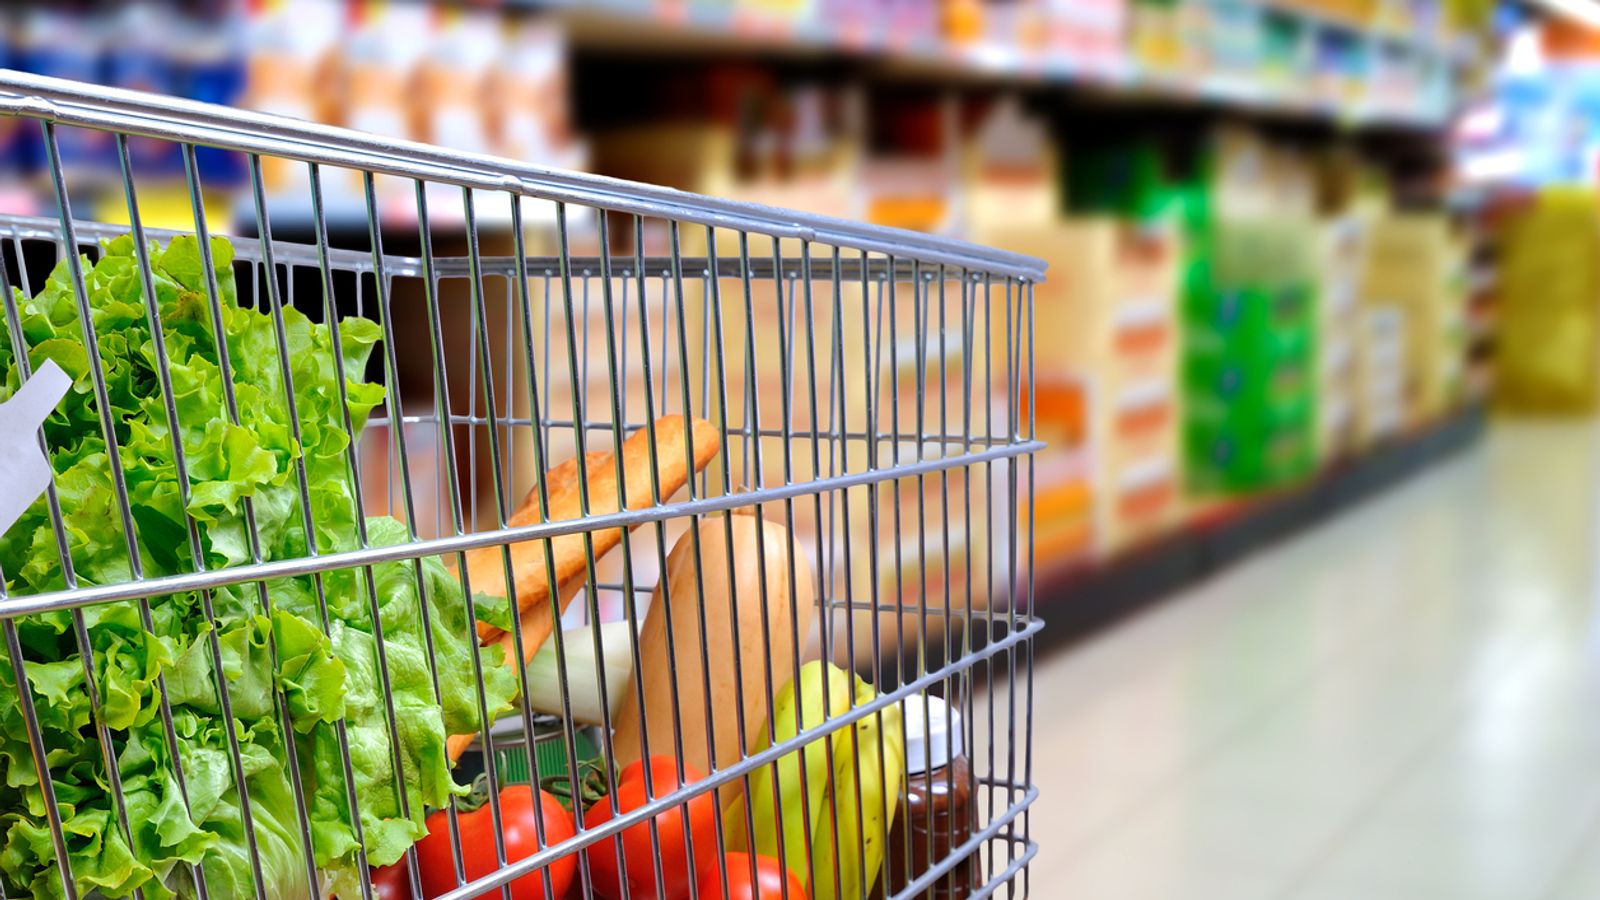 Grocery inflation rate eases but may not have peaked yet, industry data suggests